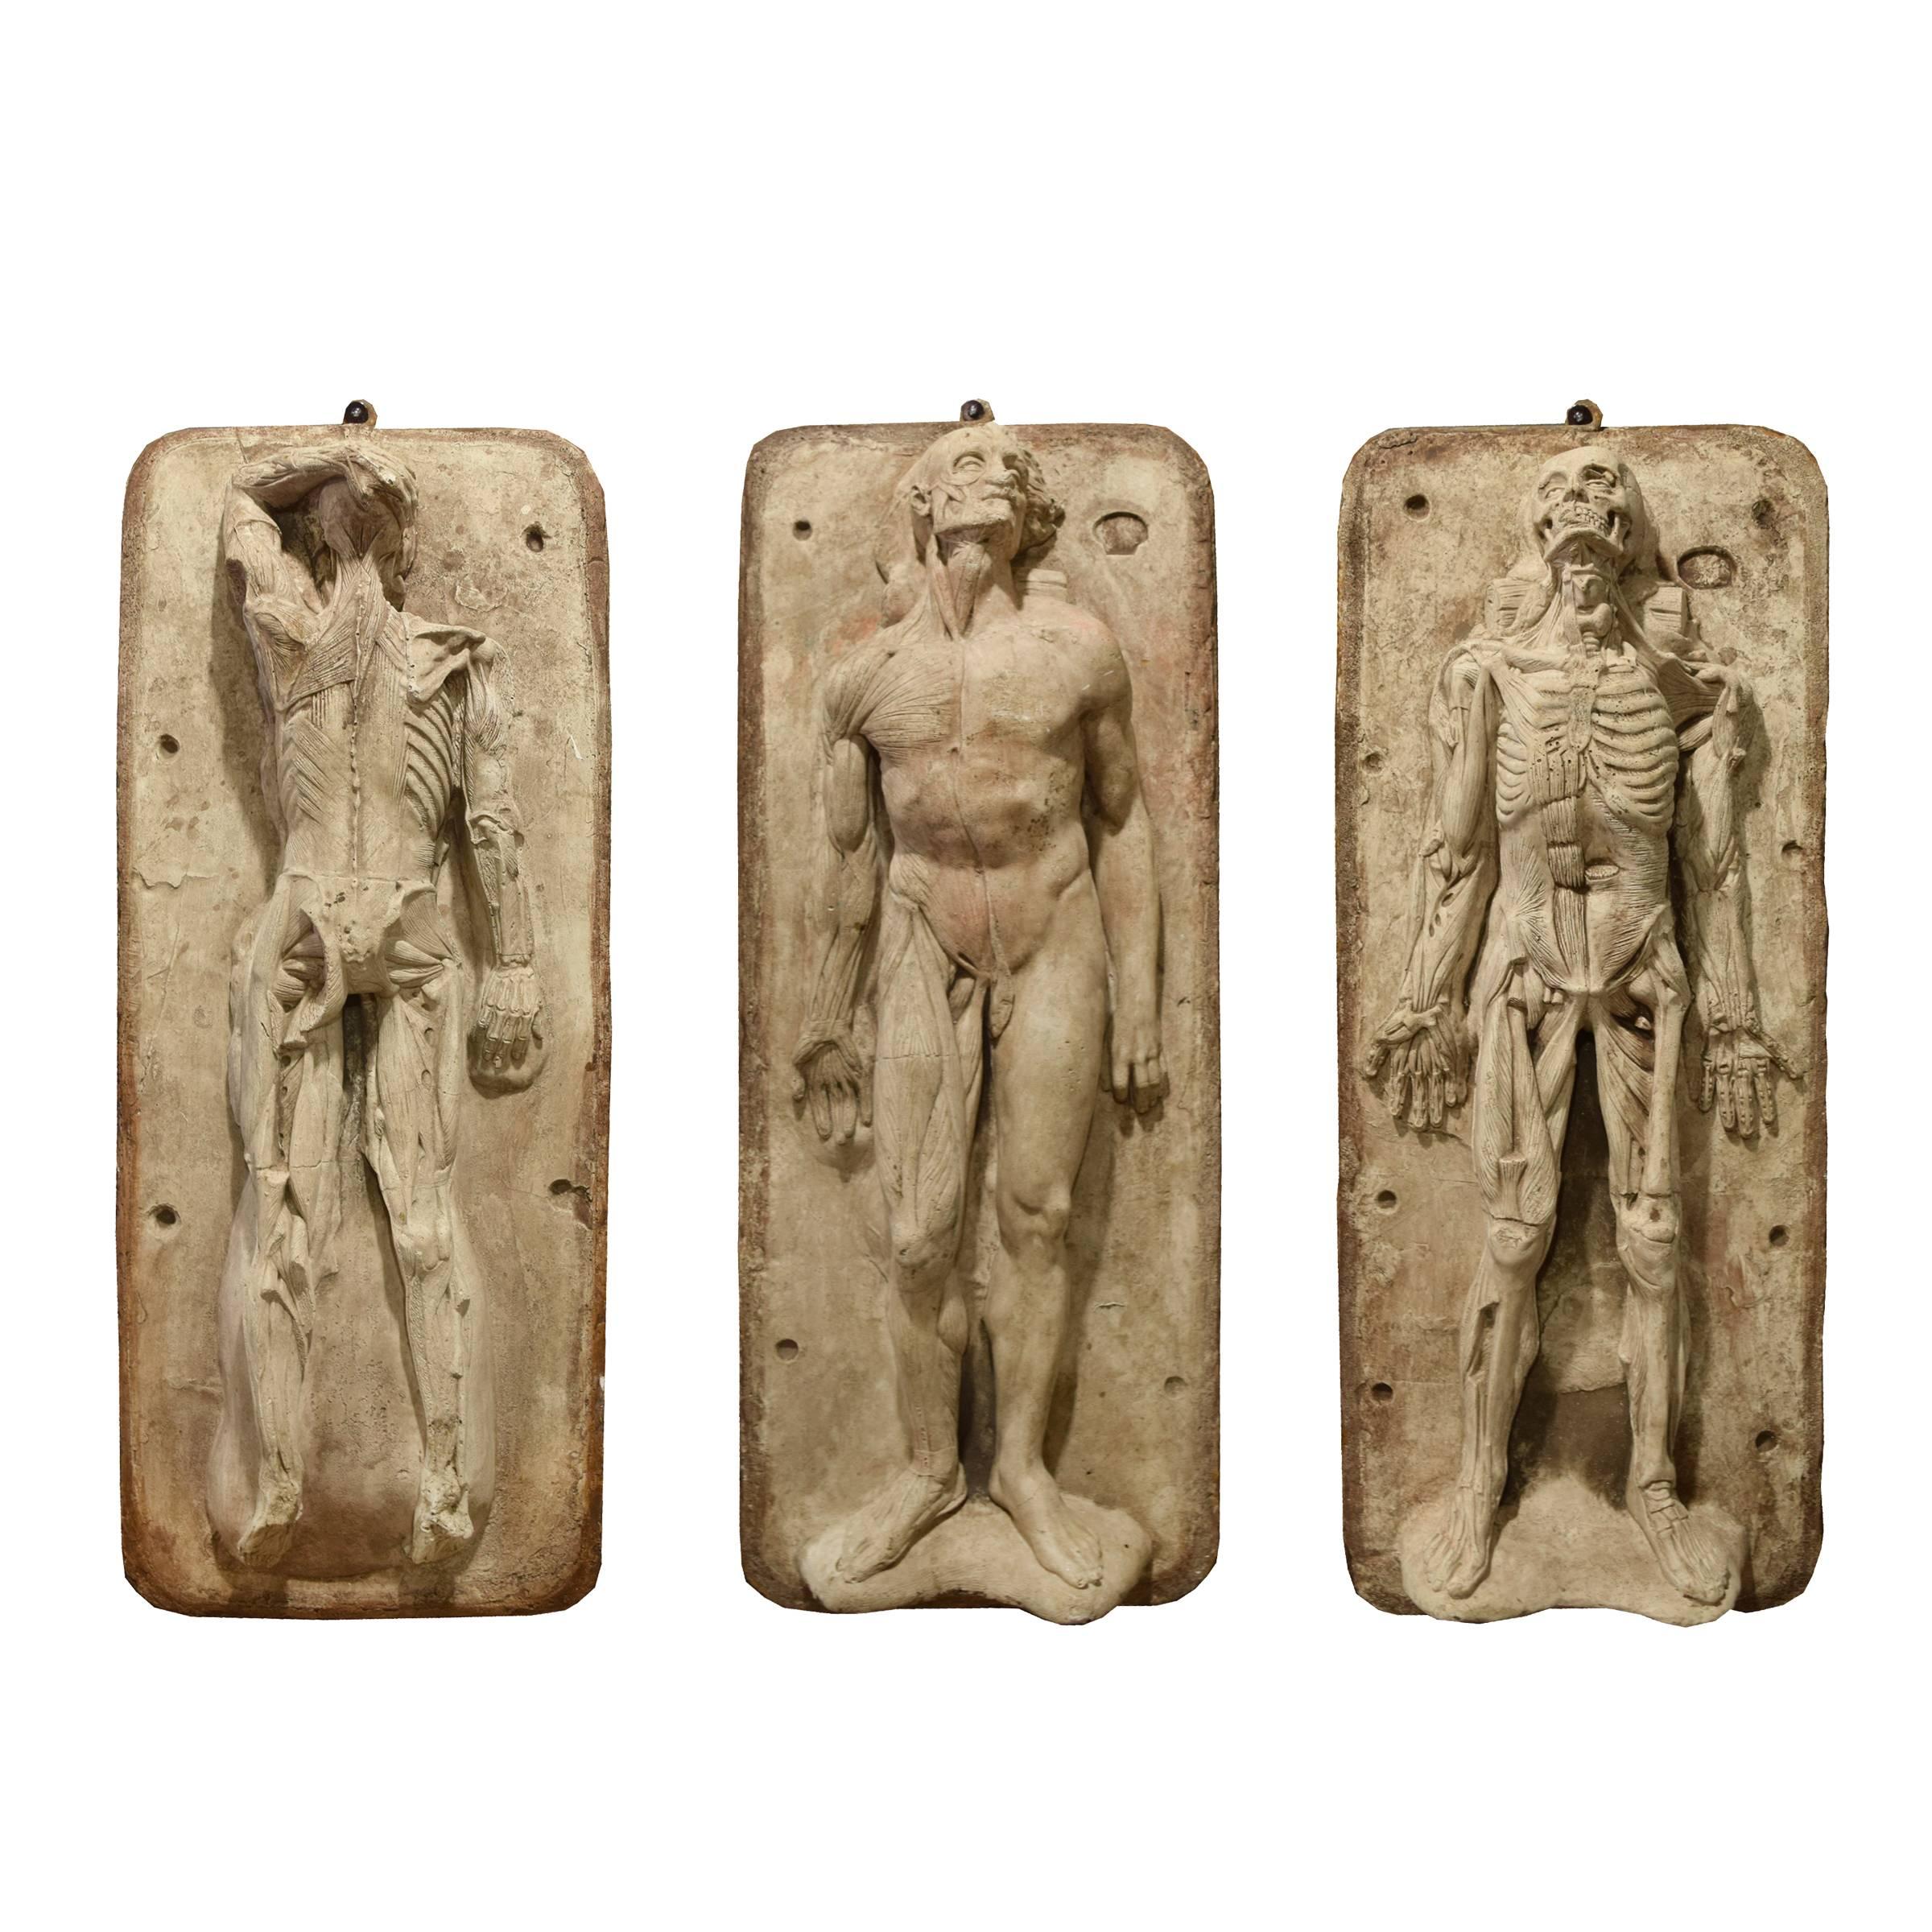 Set of Three 19th Century French Anatomical Models